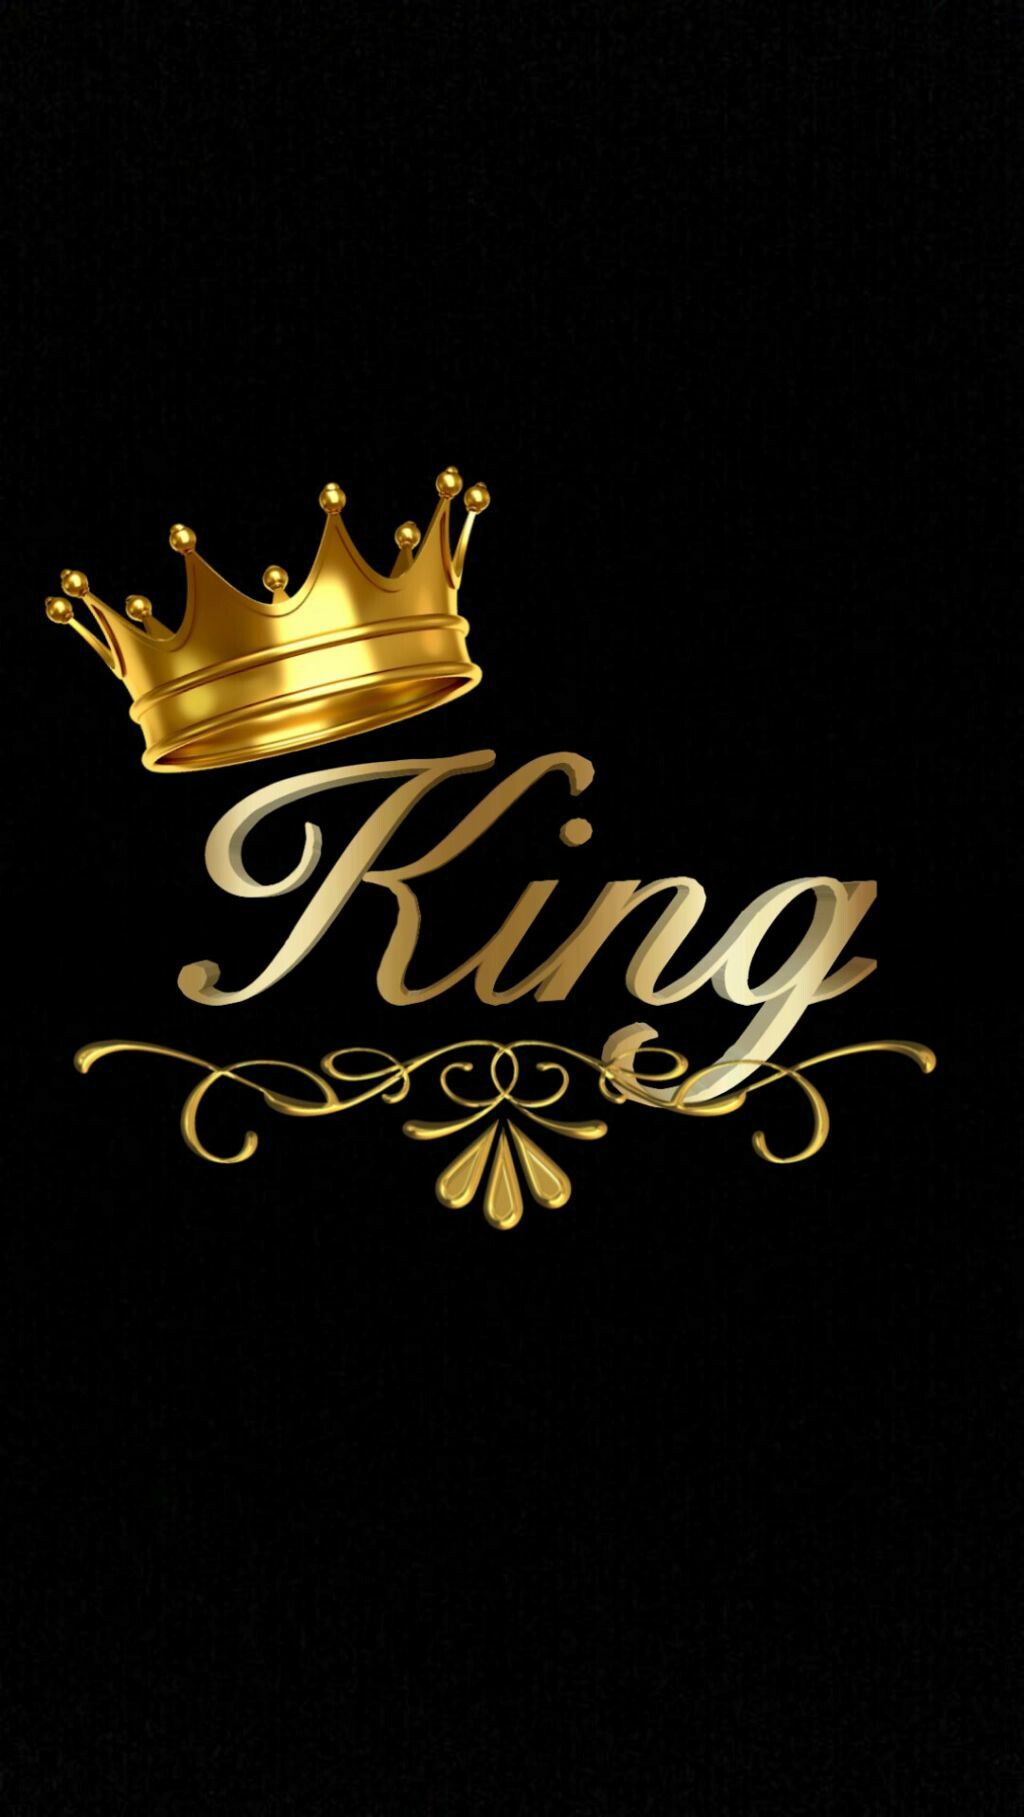 King Wallpapers